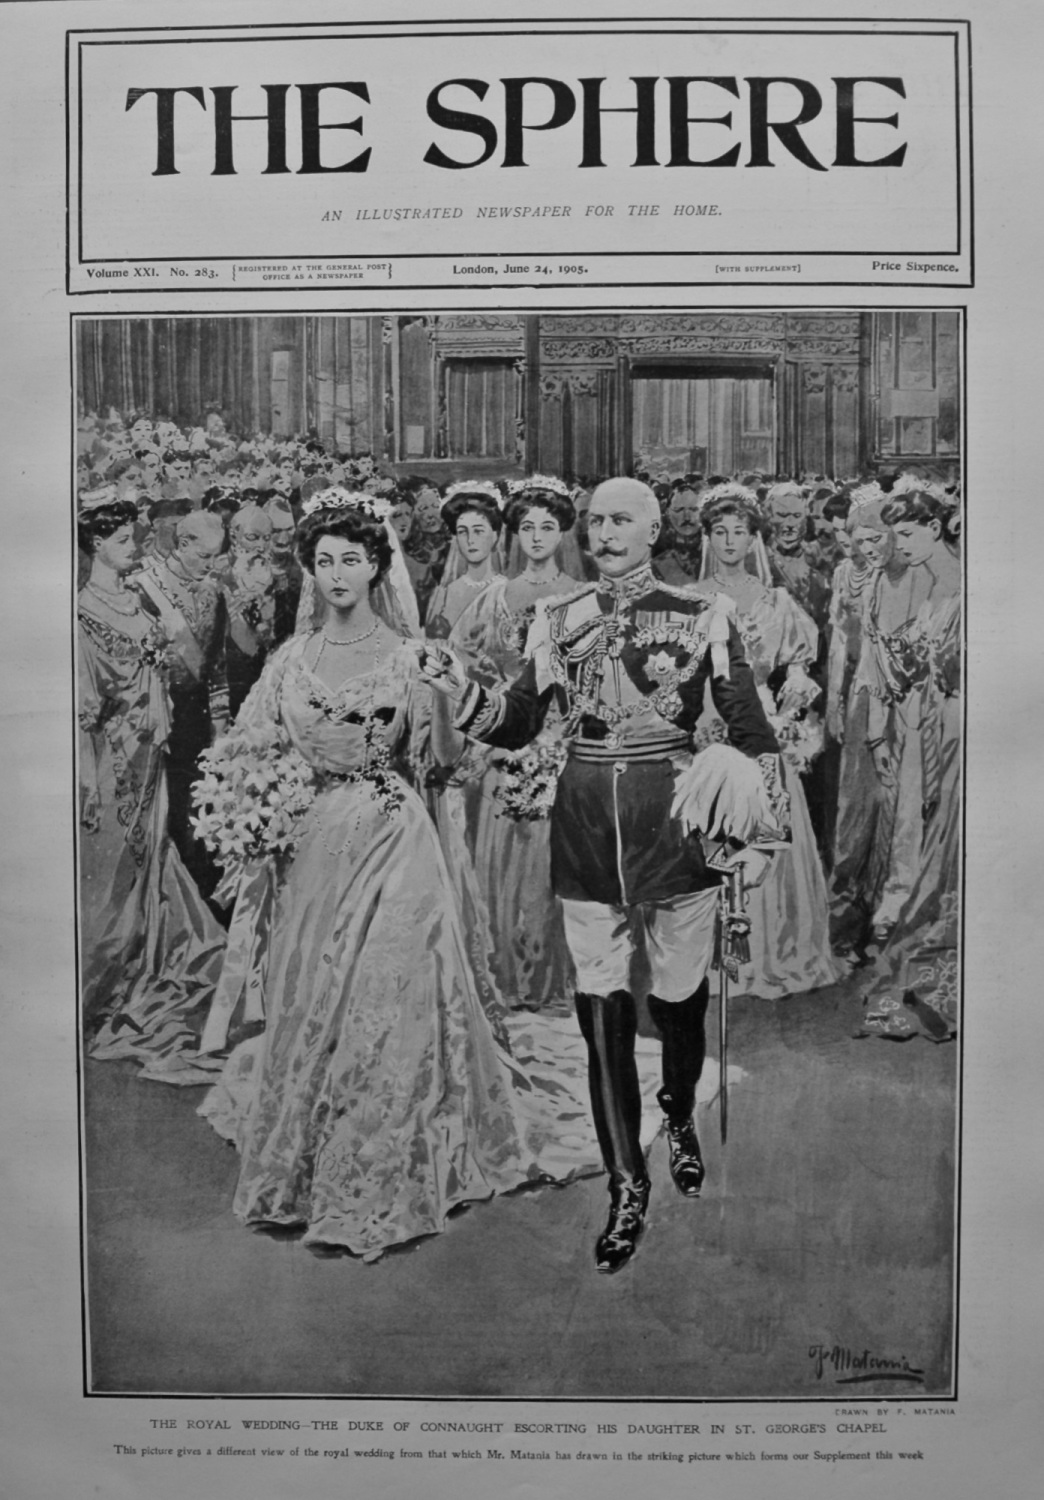 The Royal Wedding - The Duke of Connaught Escorting His Daughter in St. Geo